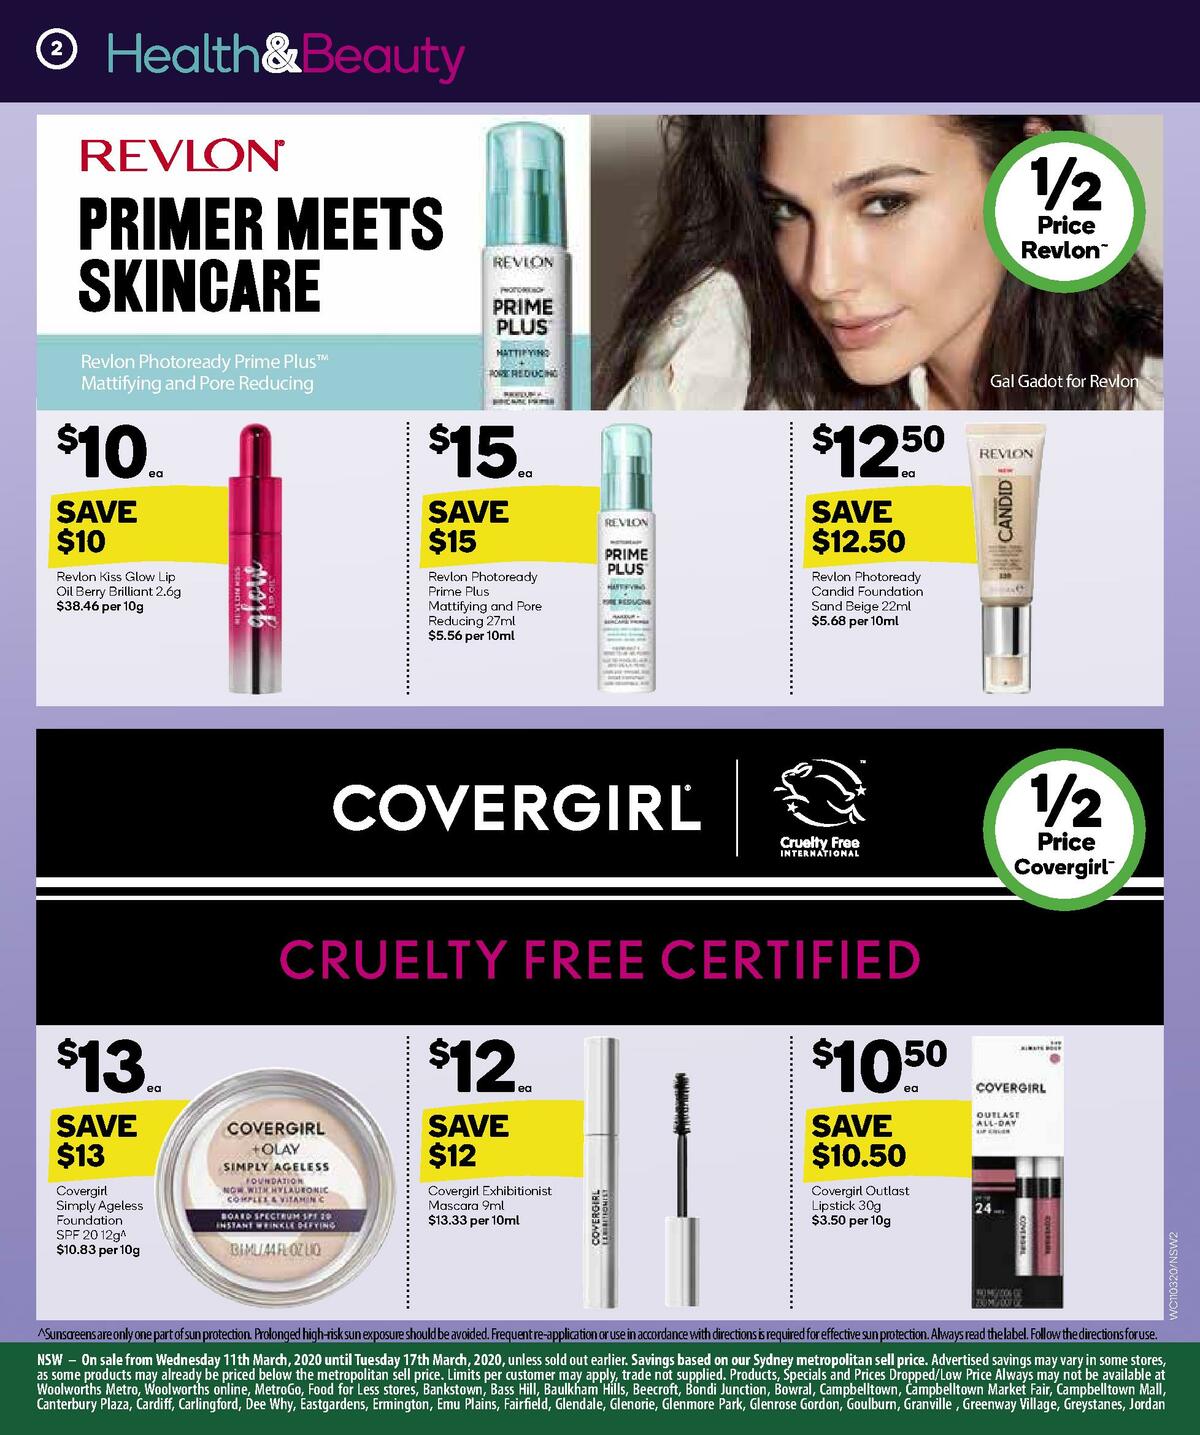 Woolworths Health & Beauty Catalogues from 11 March